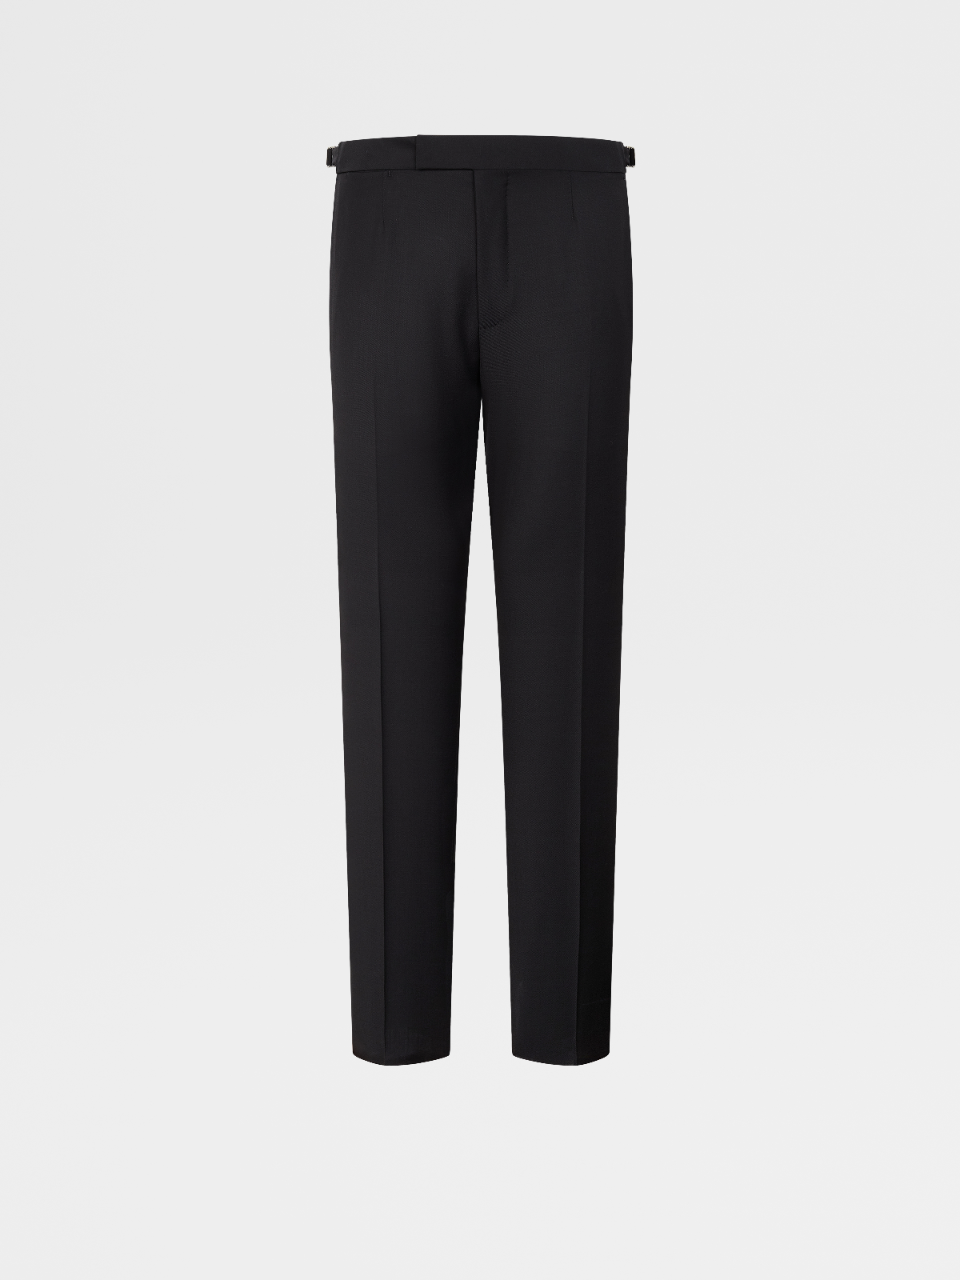 Achillfarm #UseTheExisting™ Wool and Mohair Flat Front Trousers